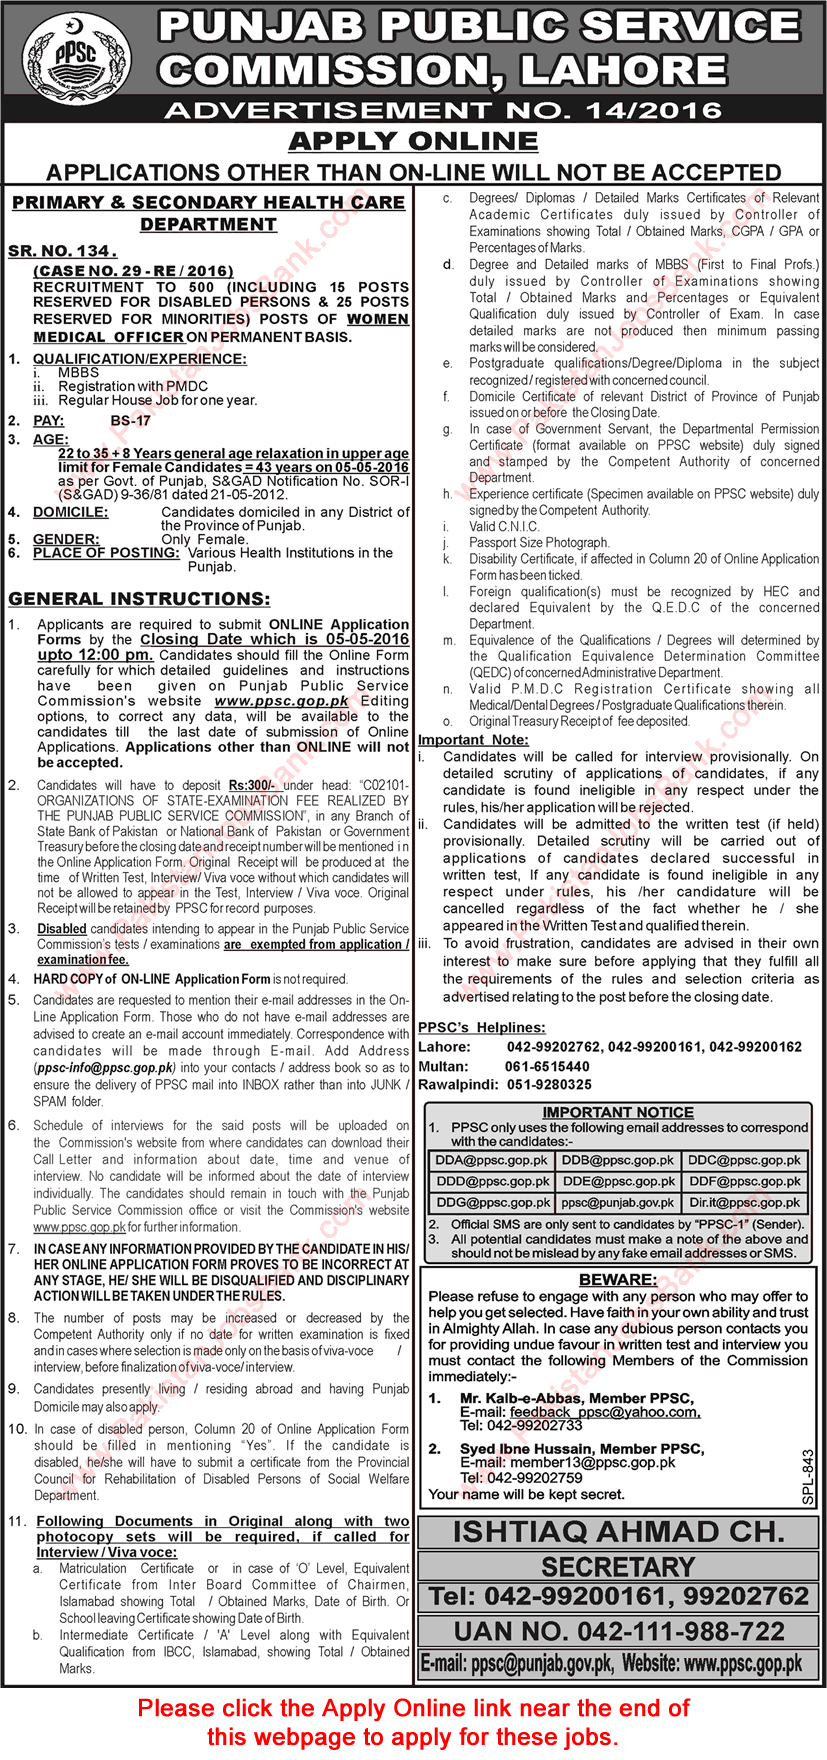 PPSC Women Medical Officer Jobs in Punjab Primary & Secondary Healthcare Department April 2016 Advertisement No 14/2016 Latest